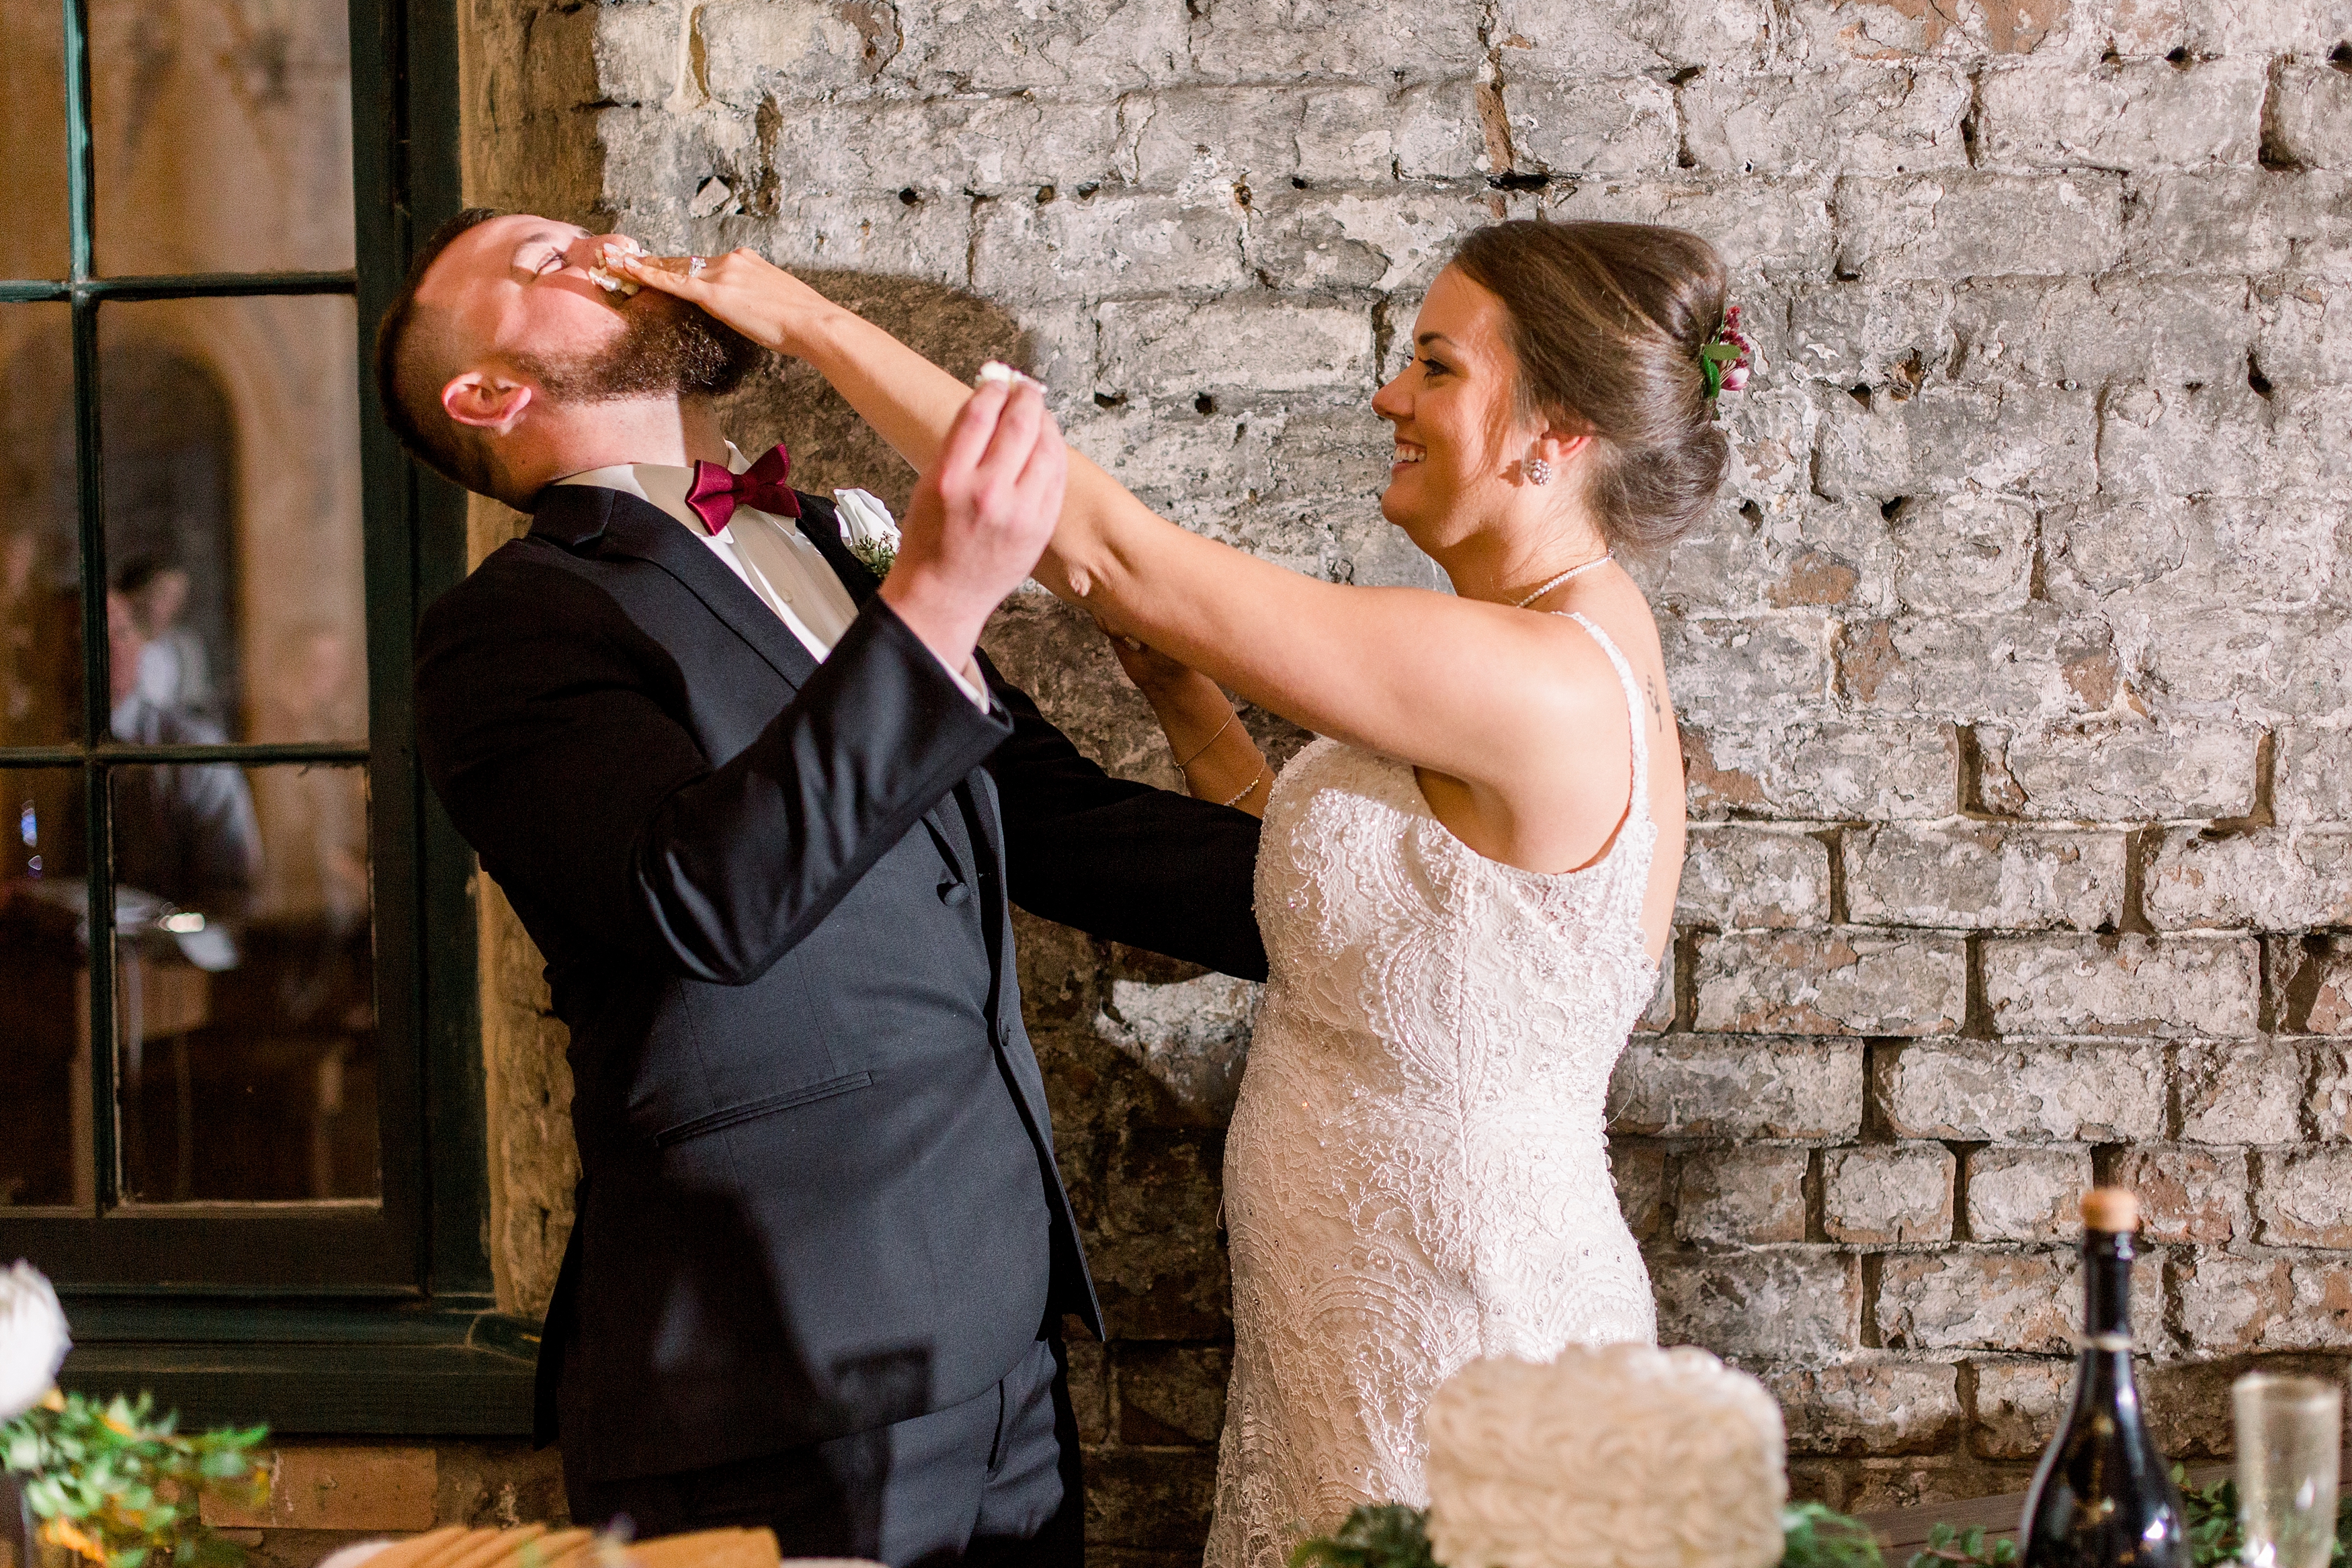 Bride and groom smashing cake in each other's faces. 